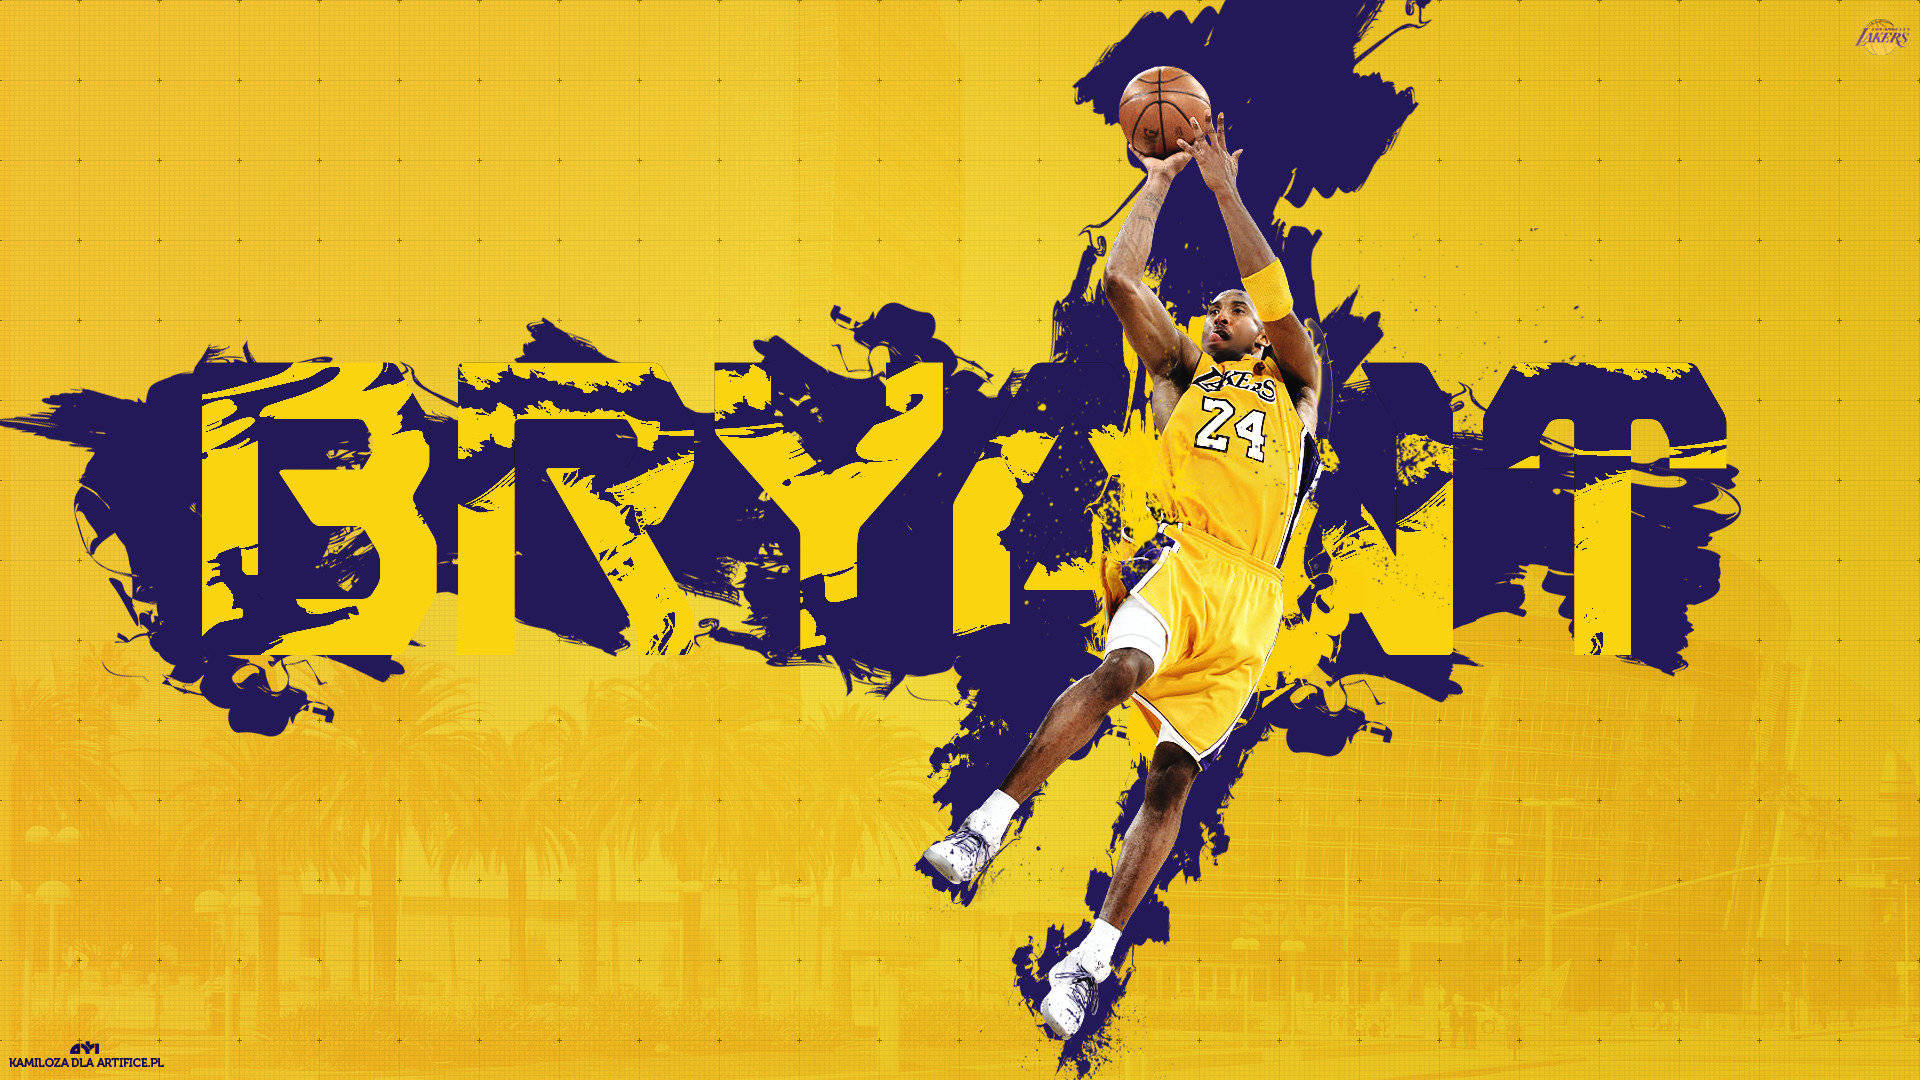 Nba Legend Kobe Bryant In An Iconic Purple And Yellow Jersey Background